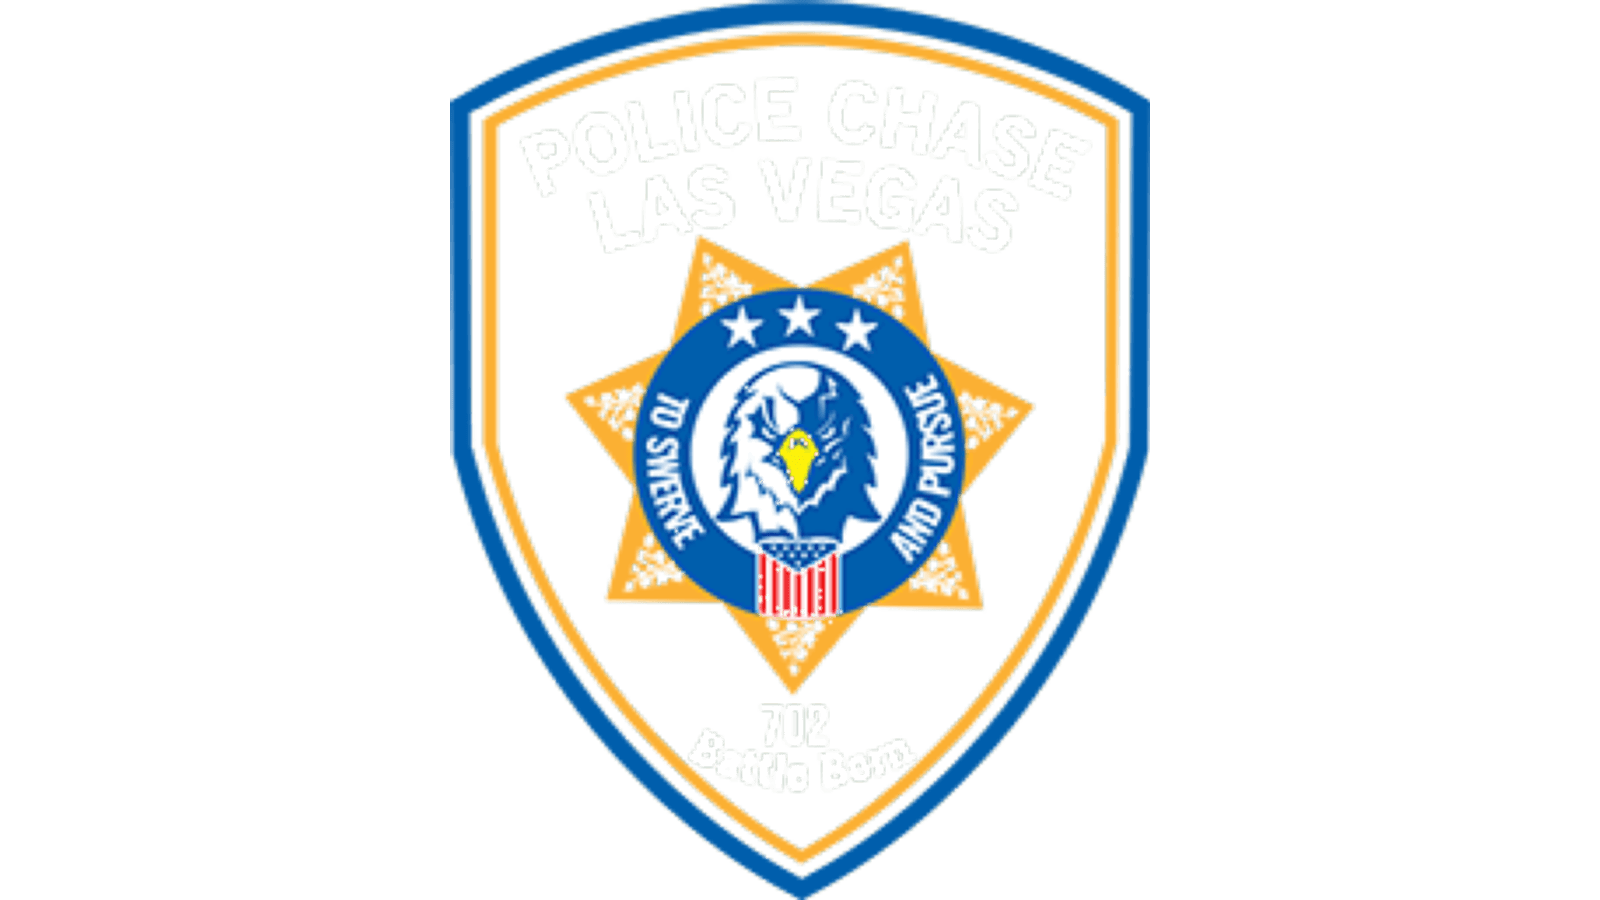 LVMPD Logo - Police Chase Las Vegas coming to LVMS in January. News. Media